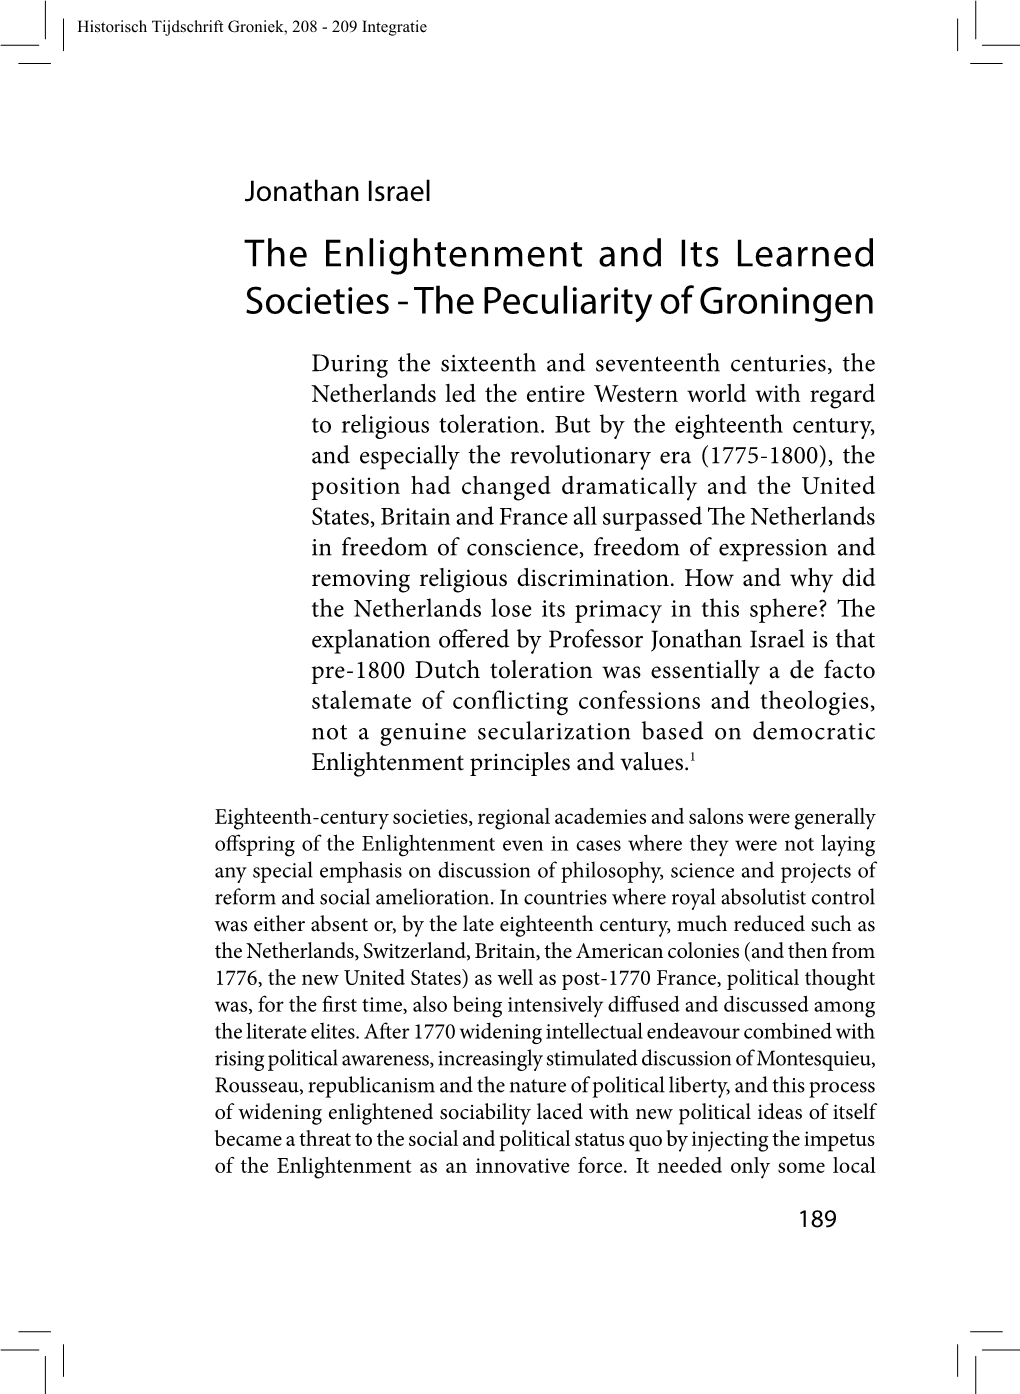 The Enlightenment and Its Learned Societies - the Peculiarity of Groningen